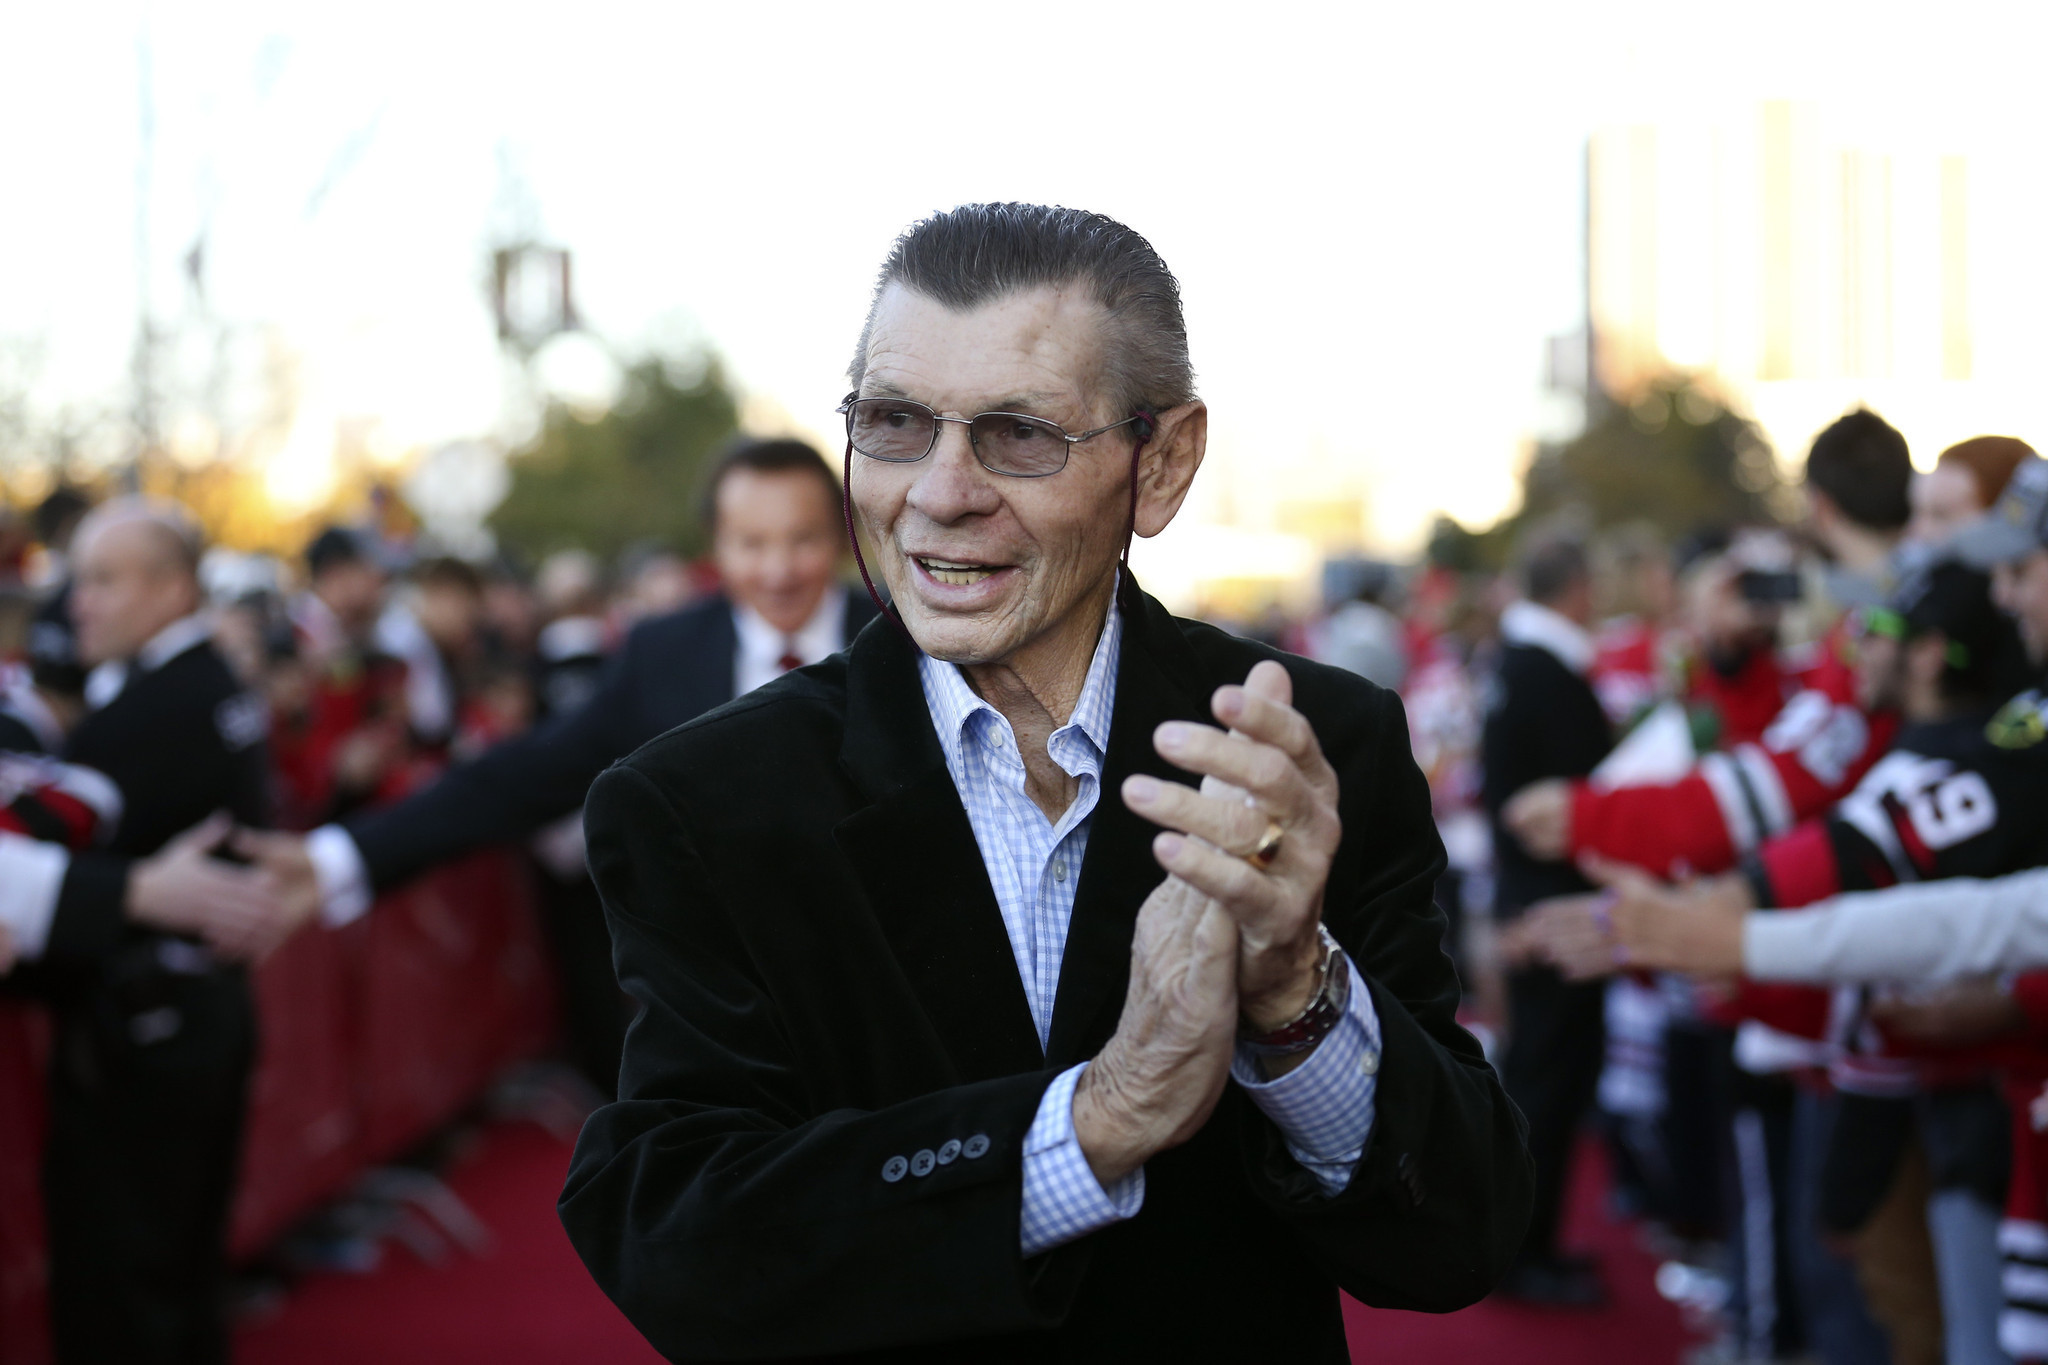 Stan Mikita won't attend NHL's Top 100 ceremony due to health issues - Chicago Tribune